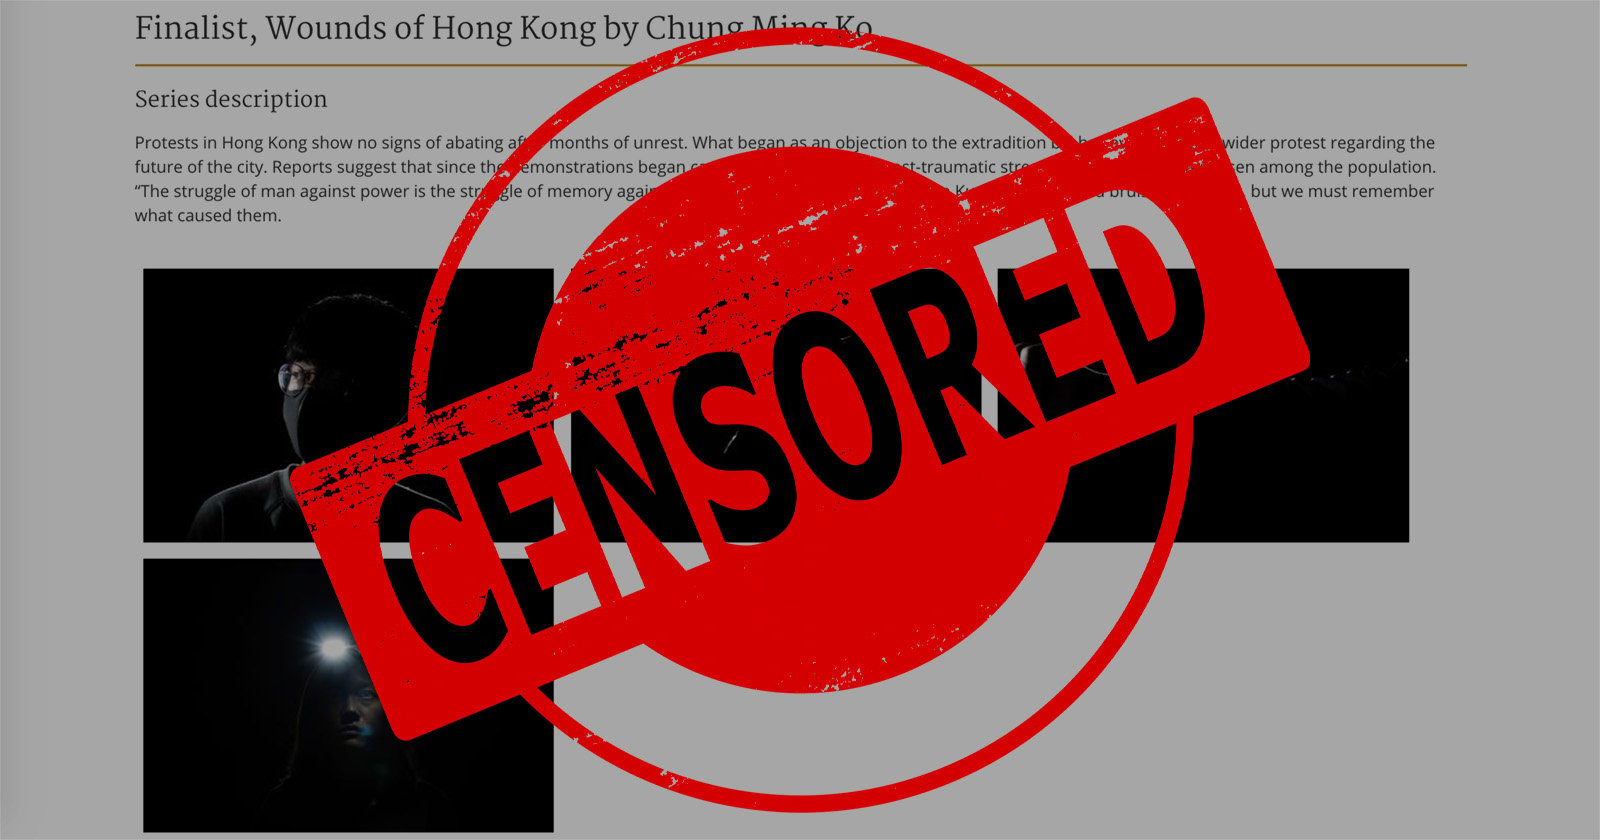 Sony World Photography Awards Accused of Censorship After Pulling Hong Kong Protest Photos